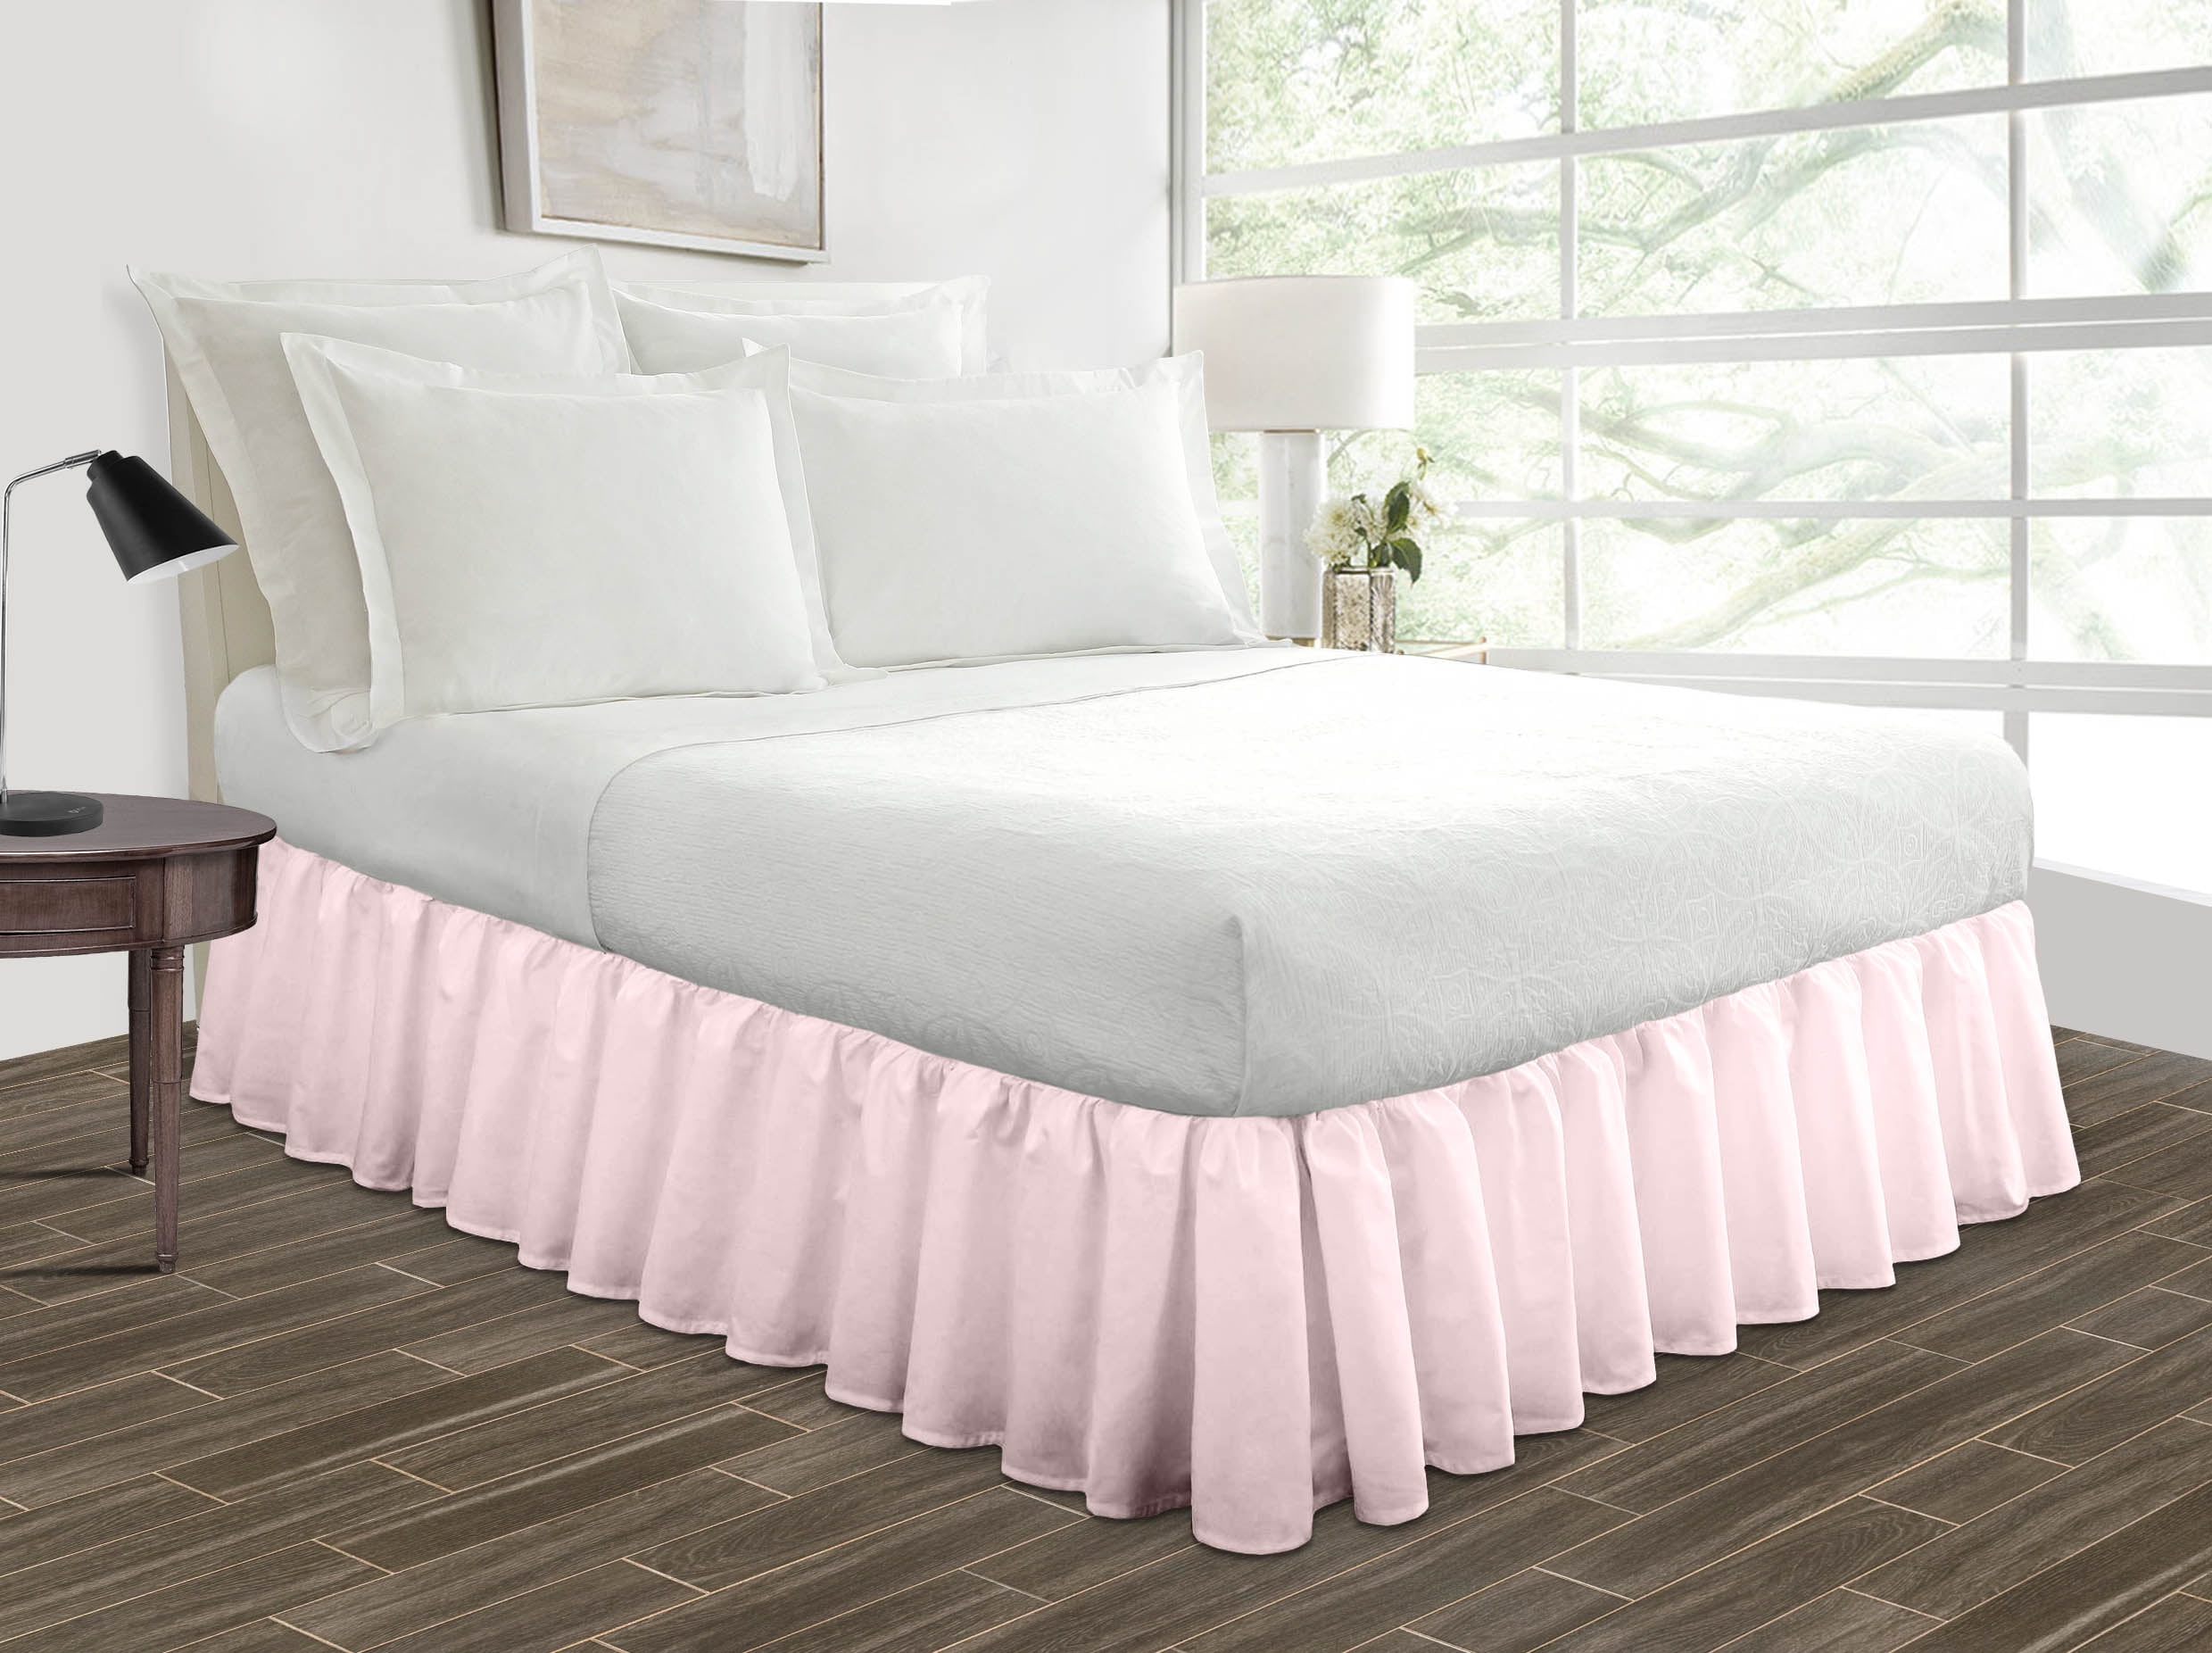 1000 TC Egyptian Cotton Bed Skirt Choose Drop Length Beige Solid & All US Sizes 